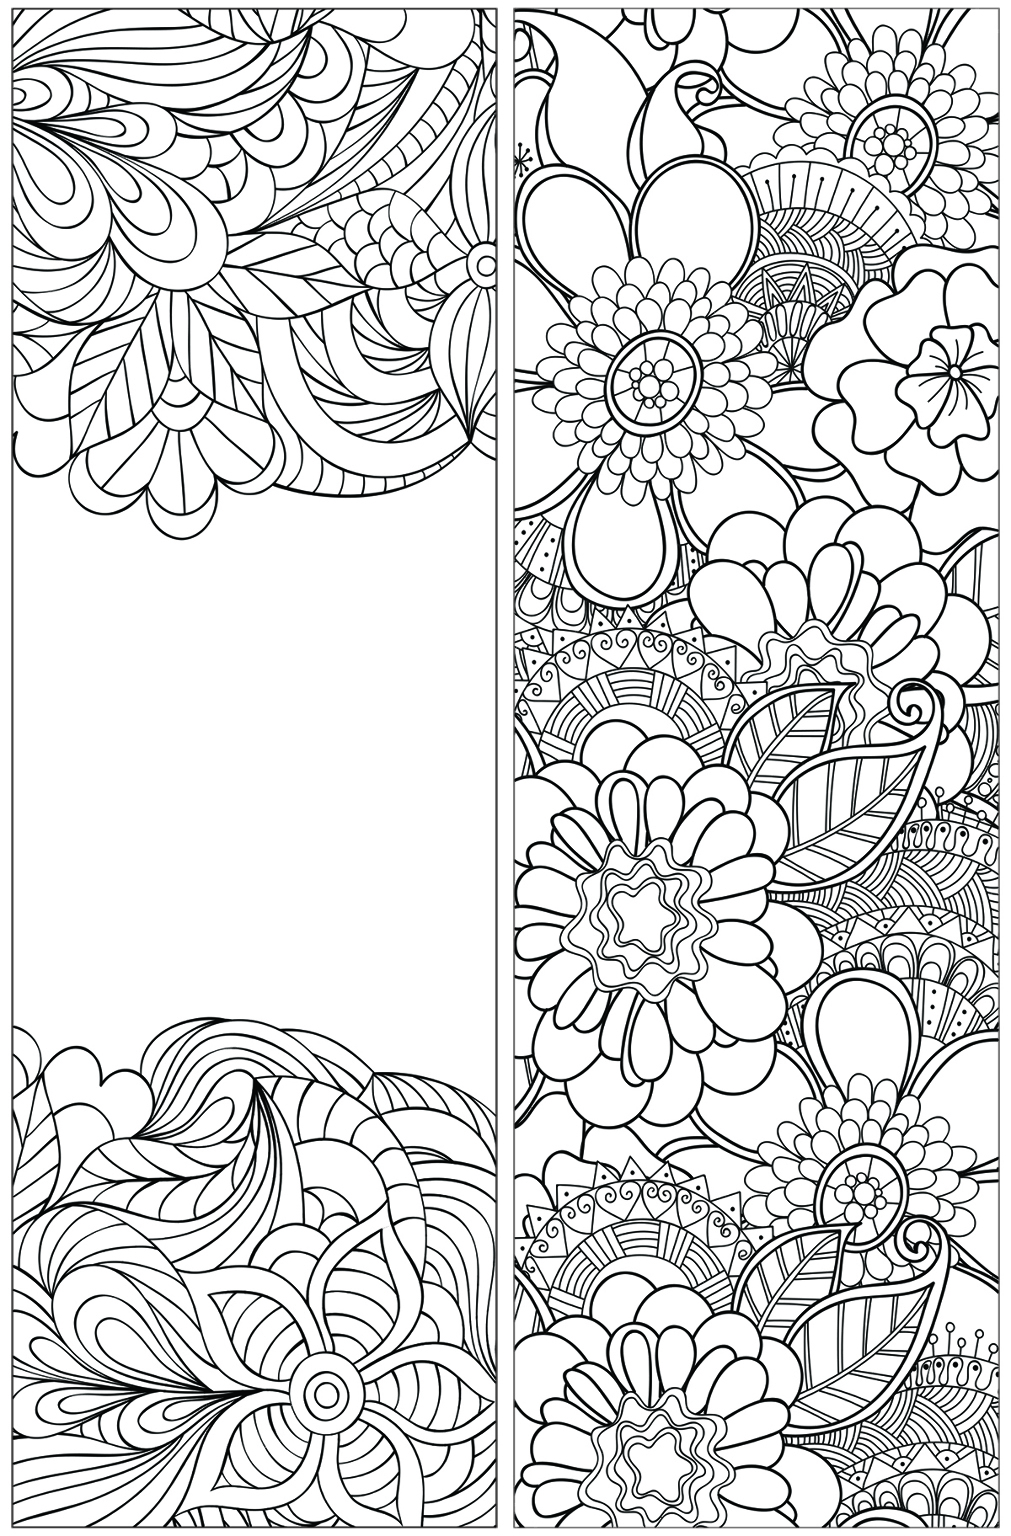 Boobies Adult Coloring Book: 20 Stress Relieving Coloring Pages